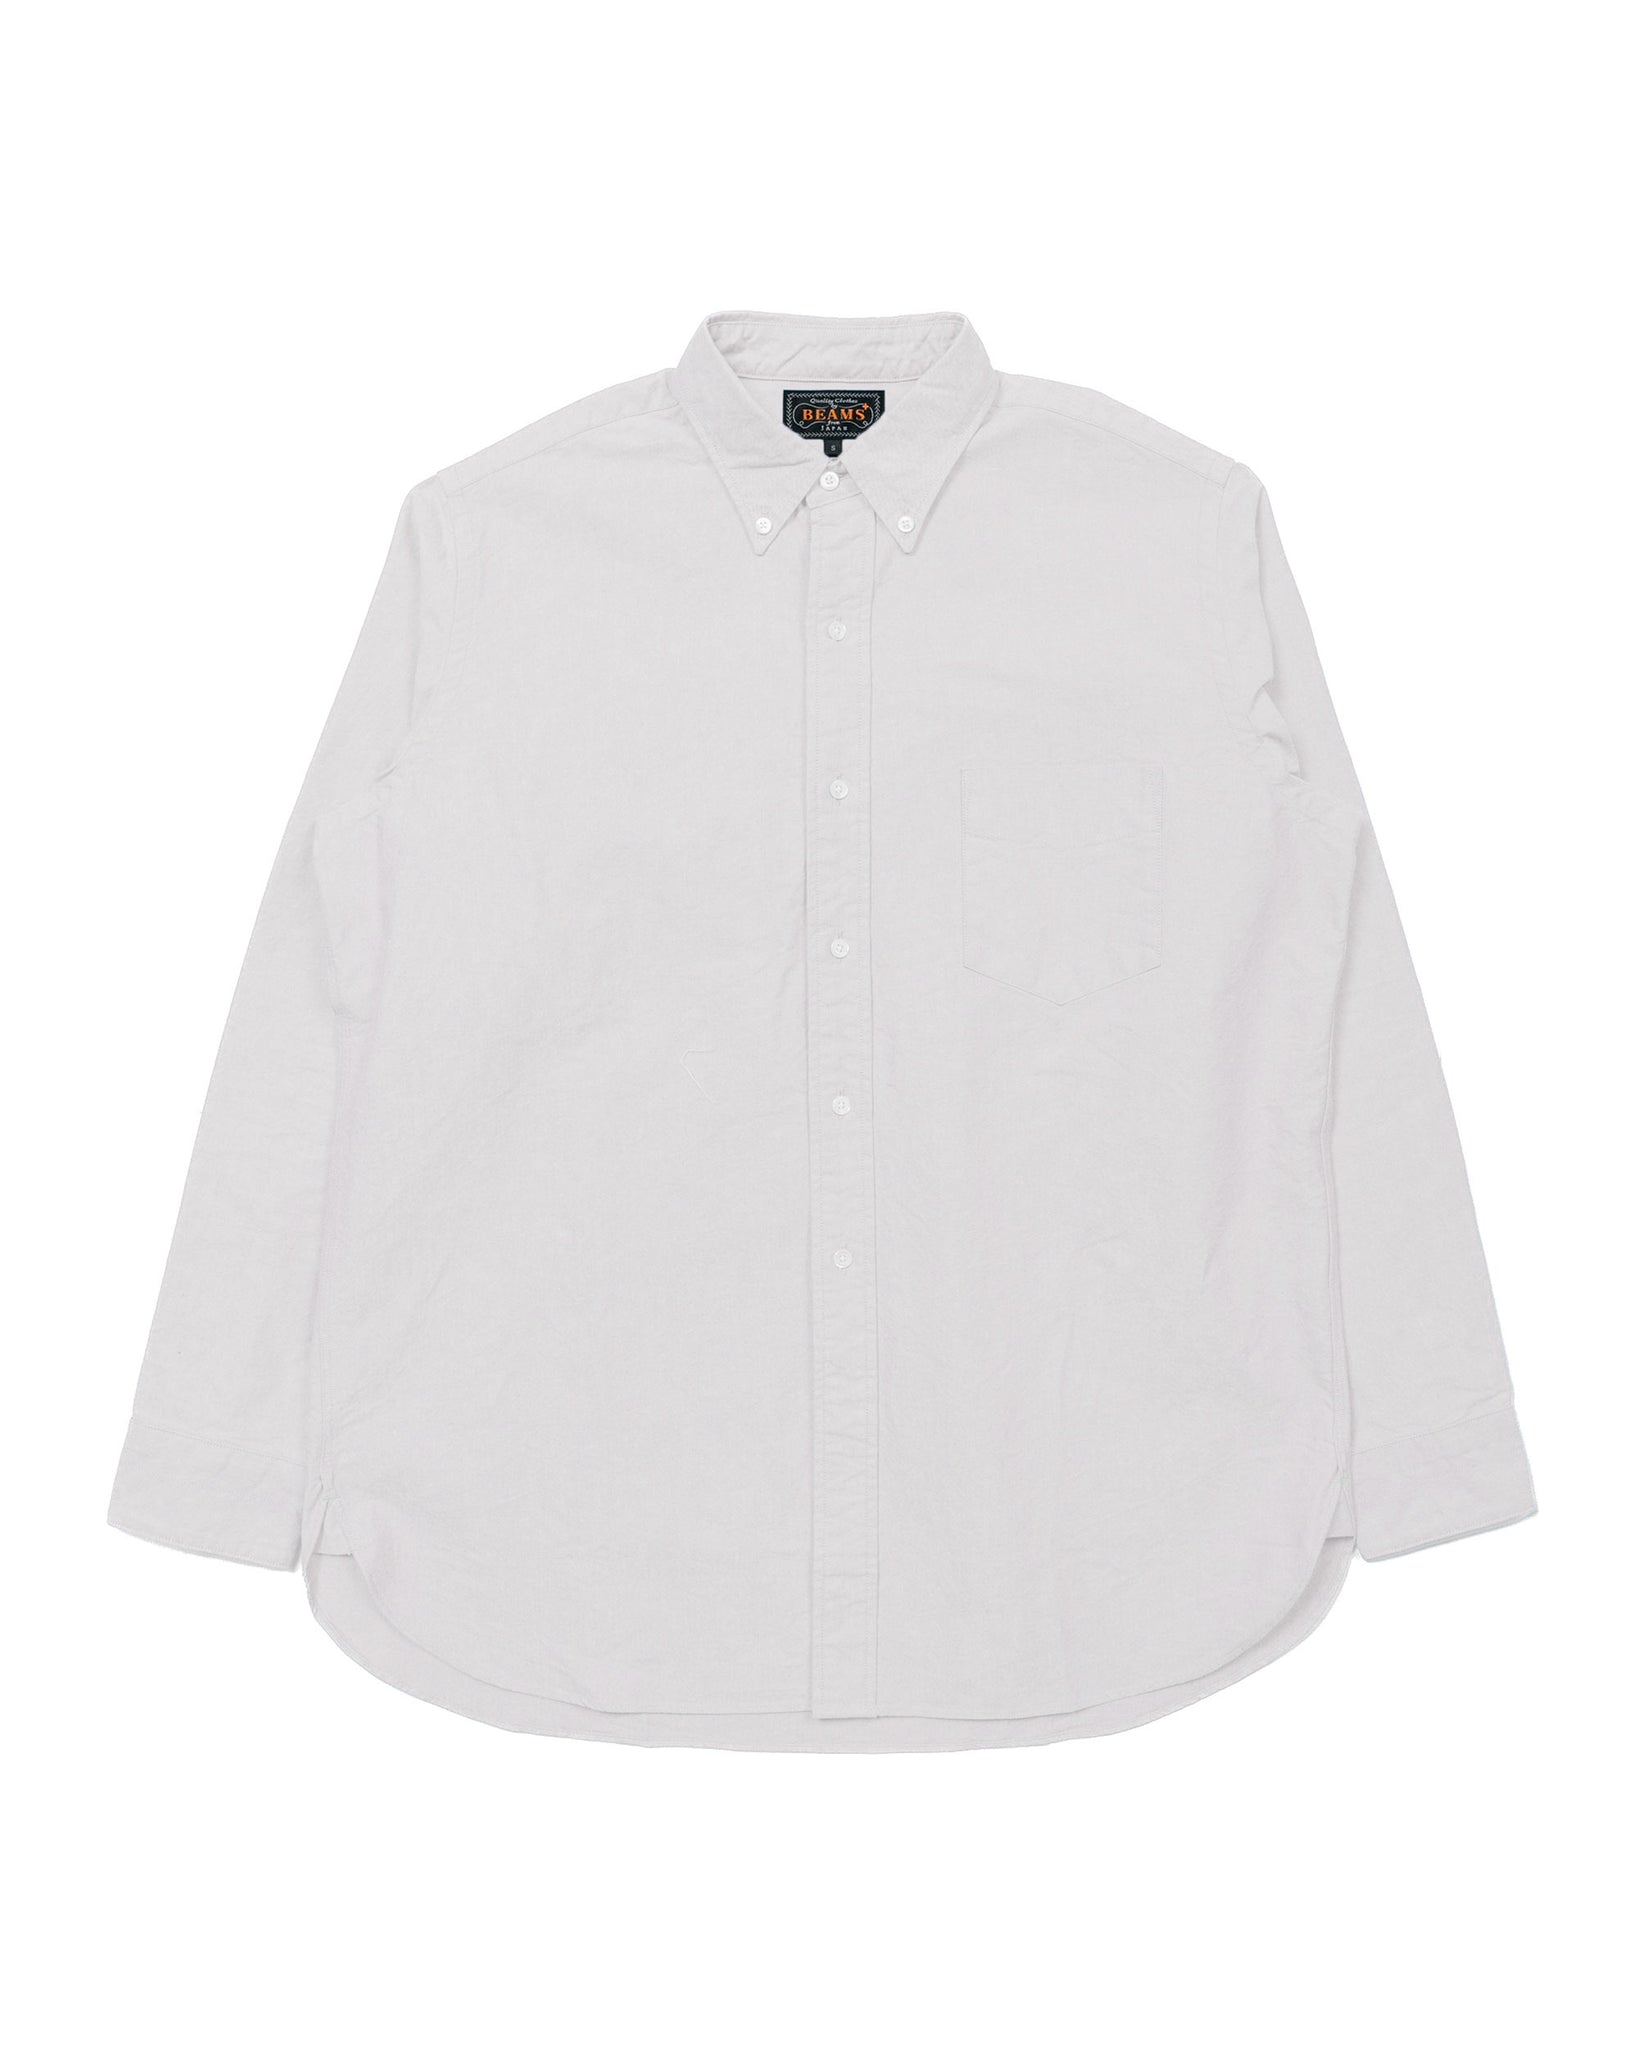 Beams Plus B.D. Classic Fit American Oxford White